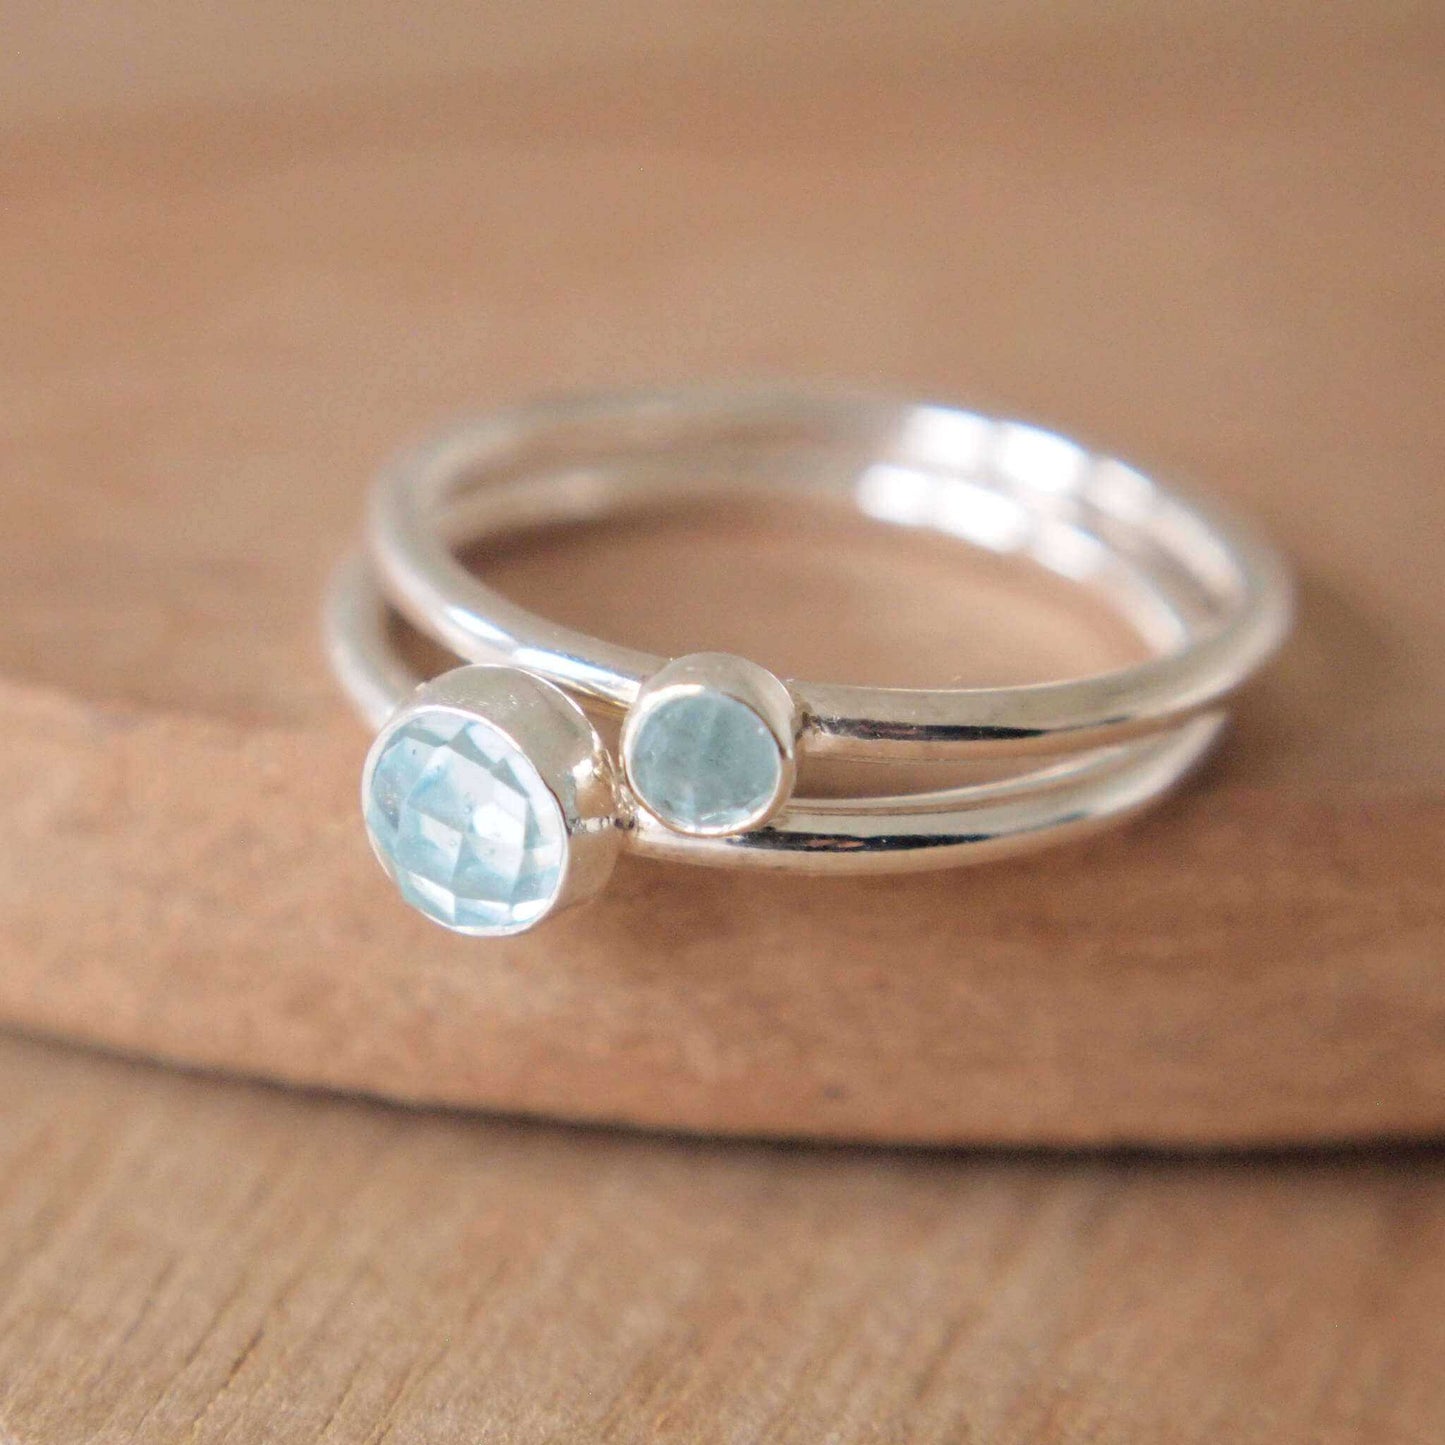 Two ring set in Sterling Silver and Blue Topaz. The rings have two round facet cut cabochons in 5mm and 3mm size in a pale blue colour, and are set very simply onto bands of Sterling Silver. Handmade in Scotland by Maram Jewellery